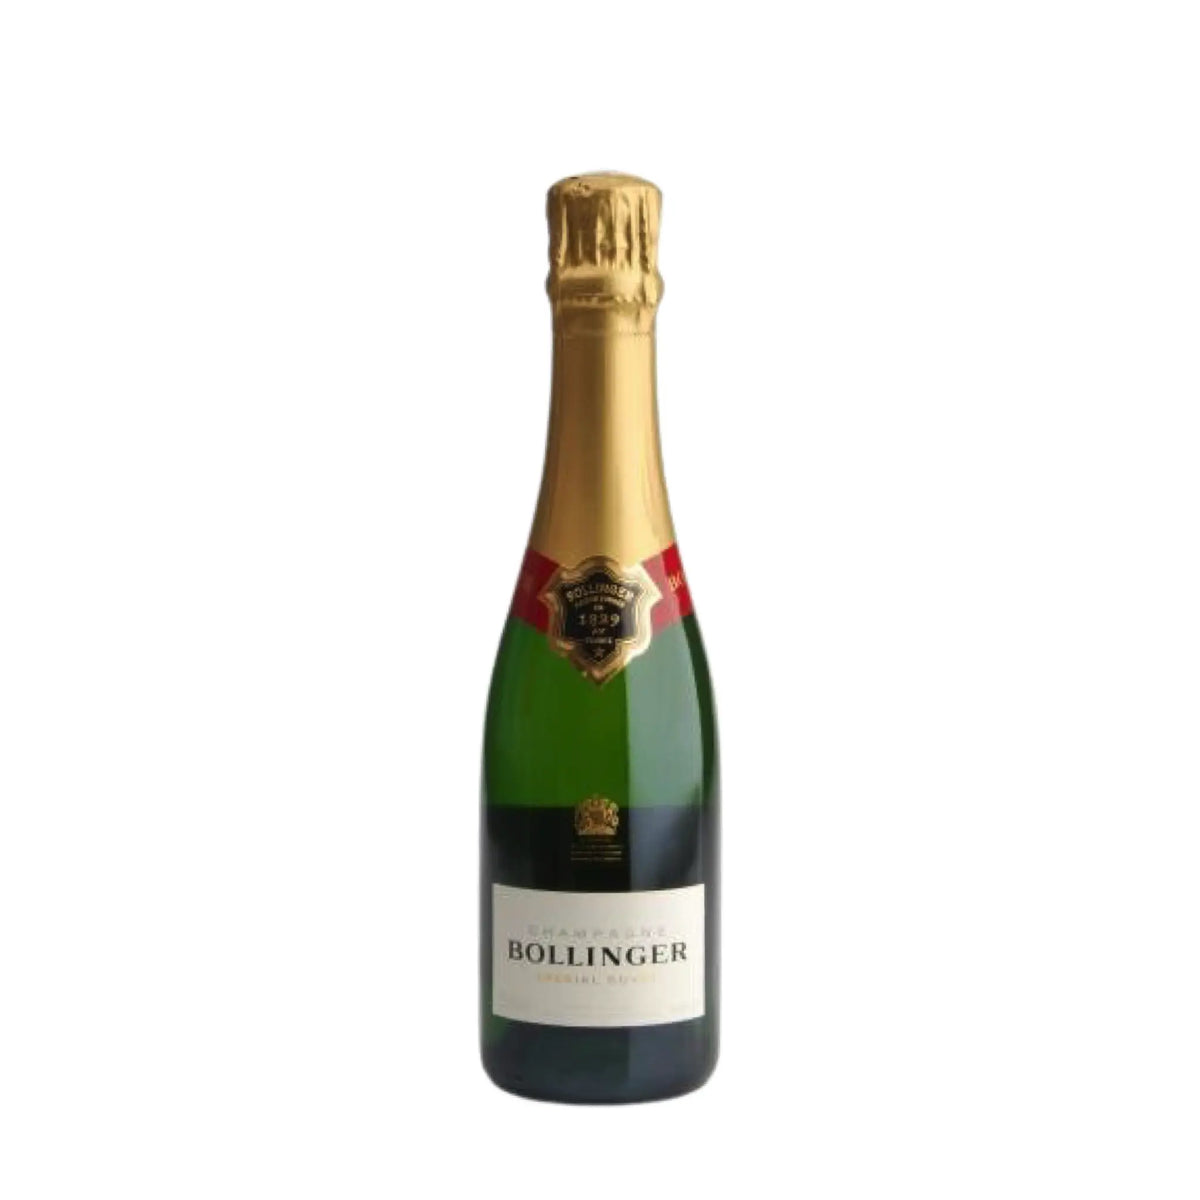 Champagne Bollinger-Champagner-Pinot Noir, Chardonnay, Pinot Meunier-Special Cuvée Brut Champagne 0,375 L-WINECOM